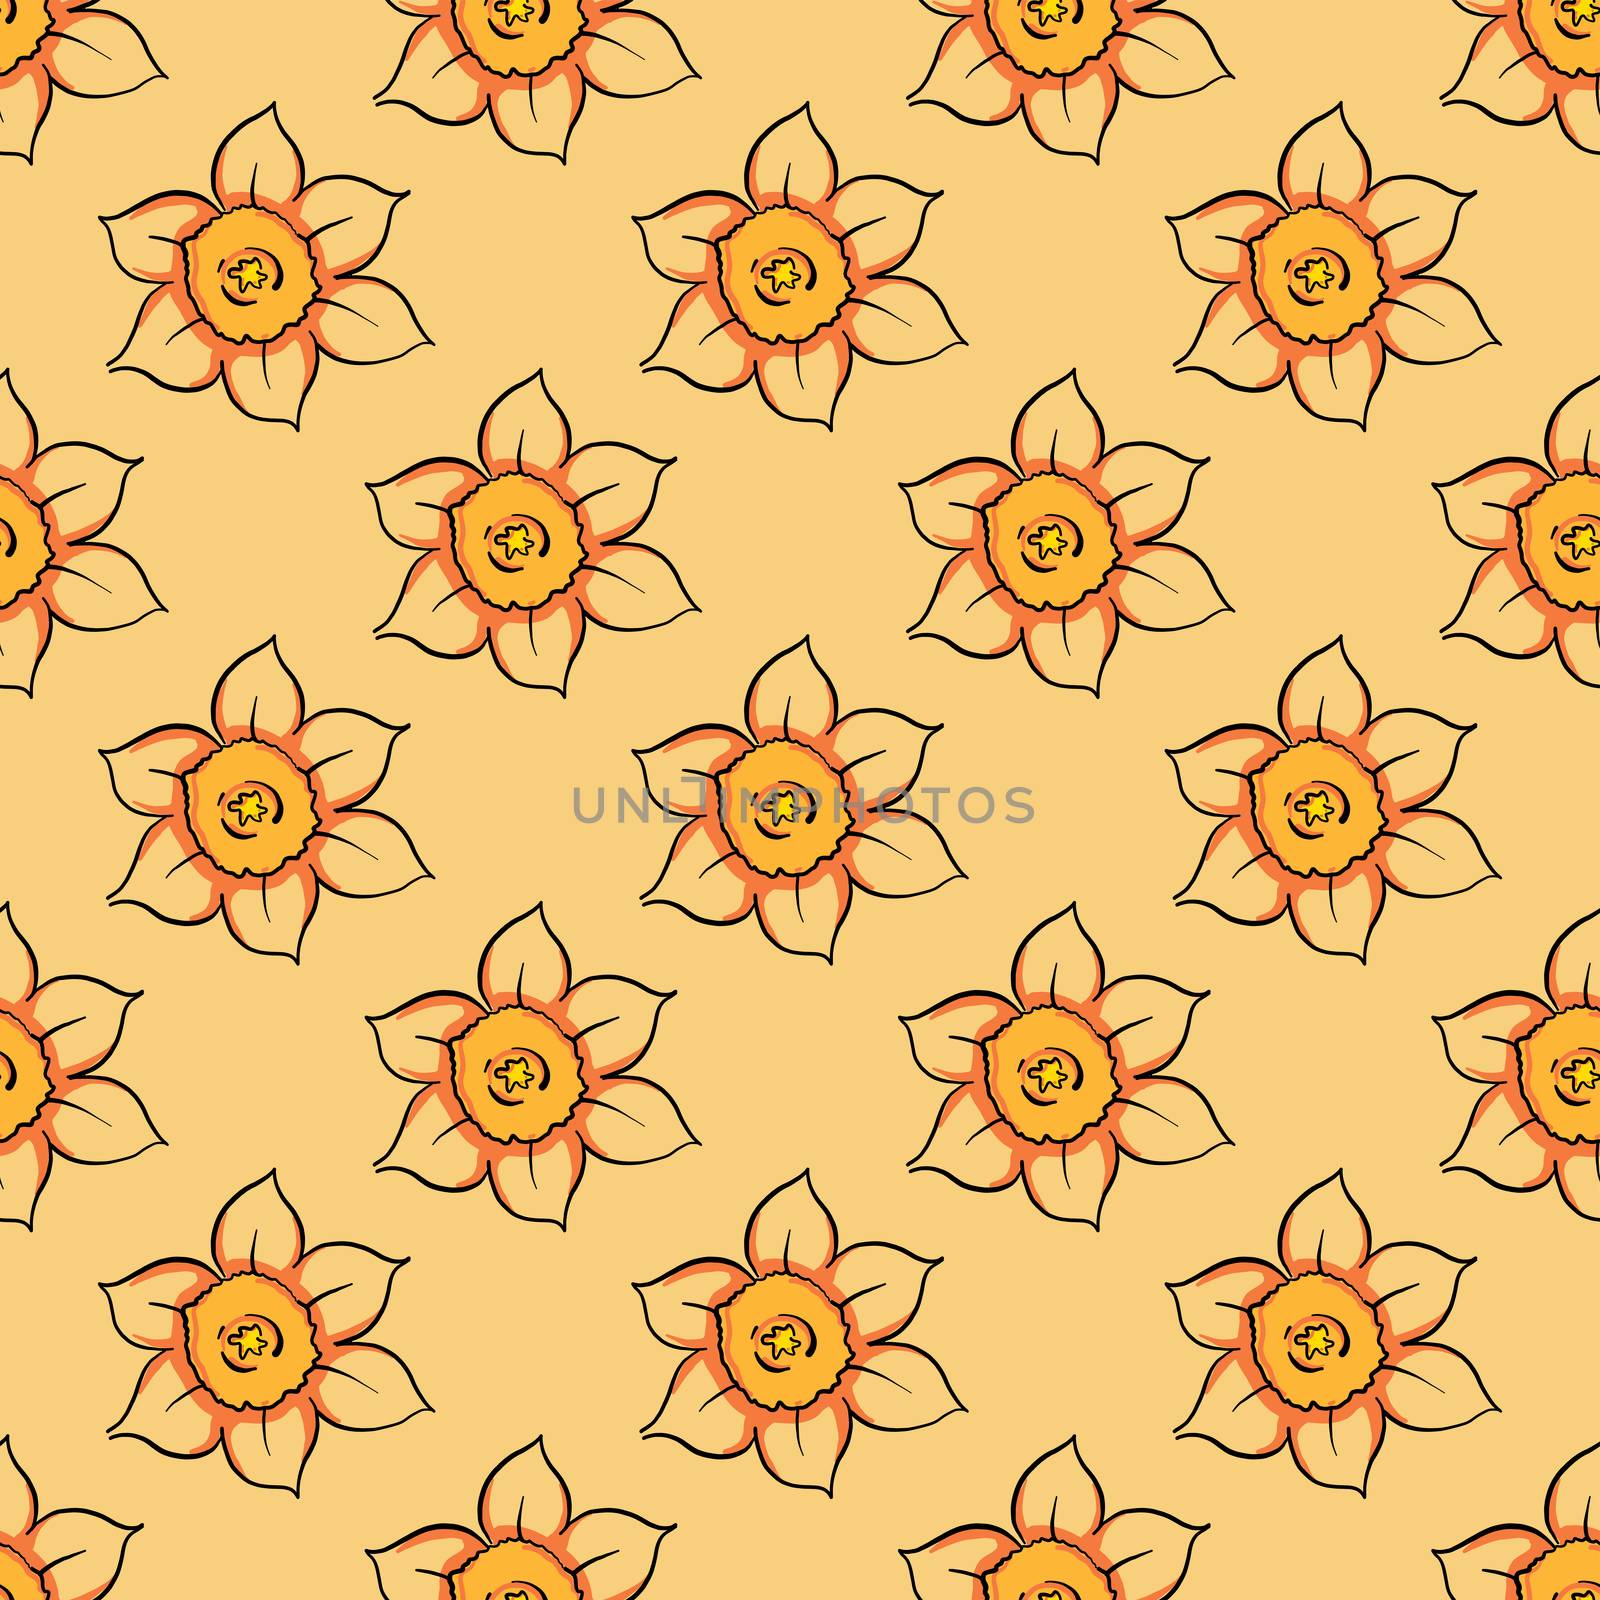 Lineart daffodil pattern , illustration, vector on white background